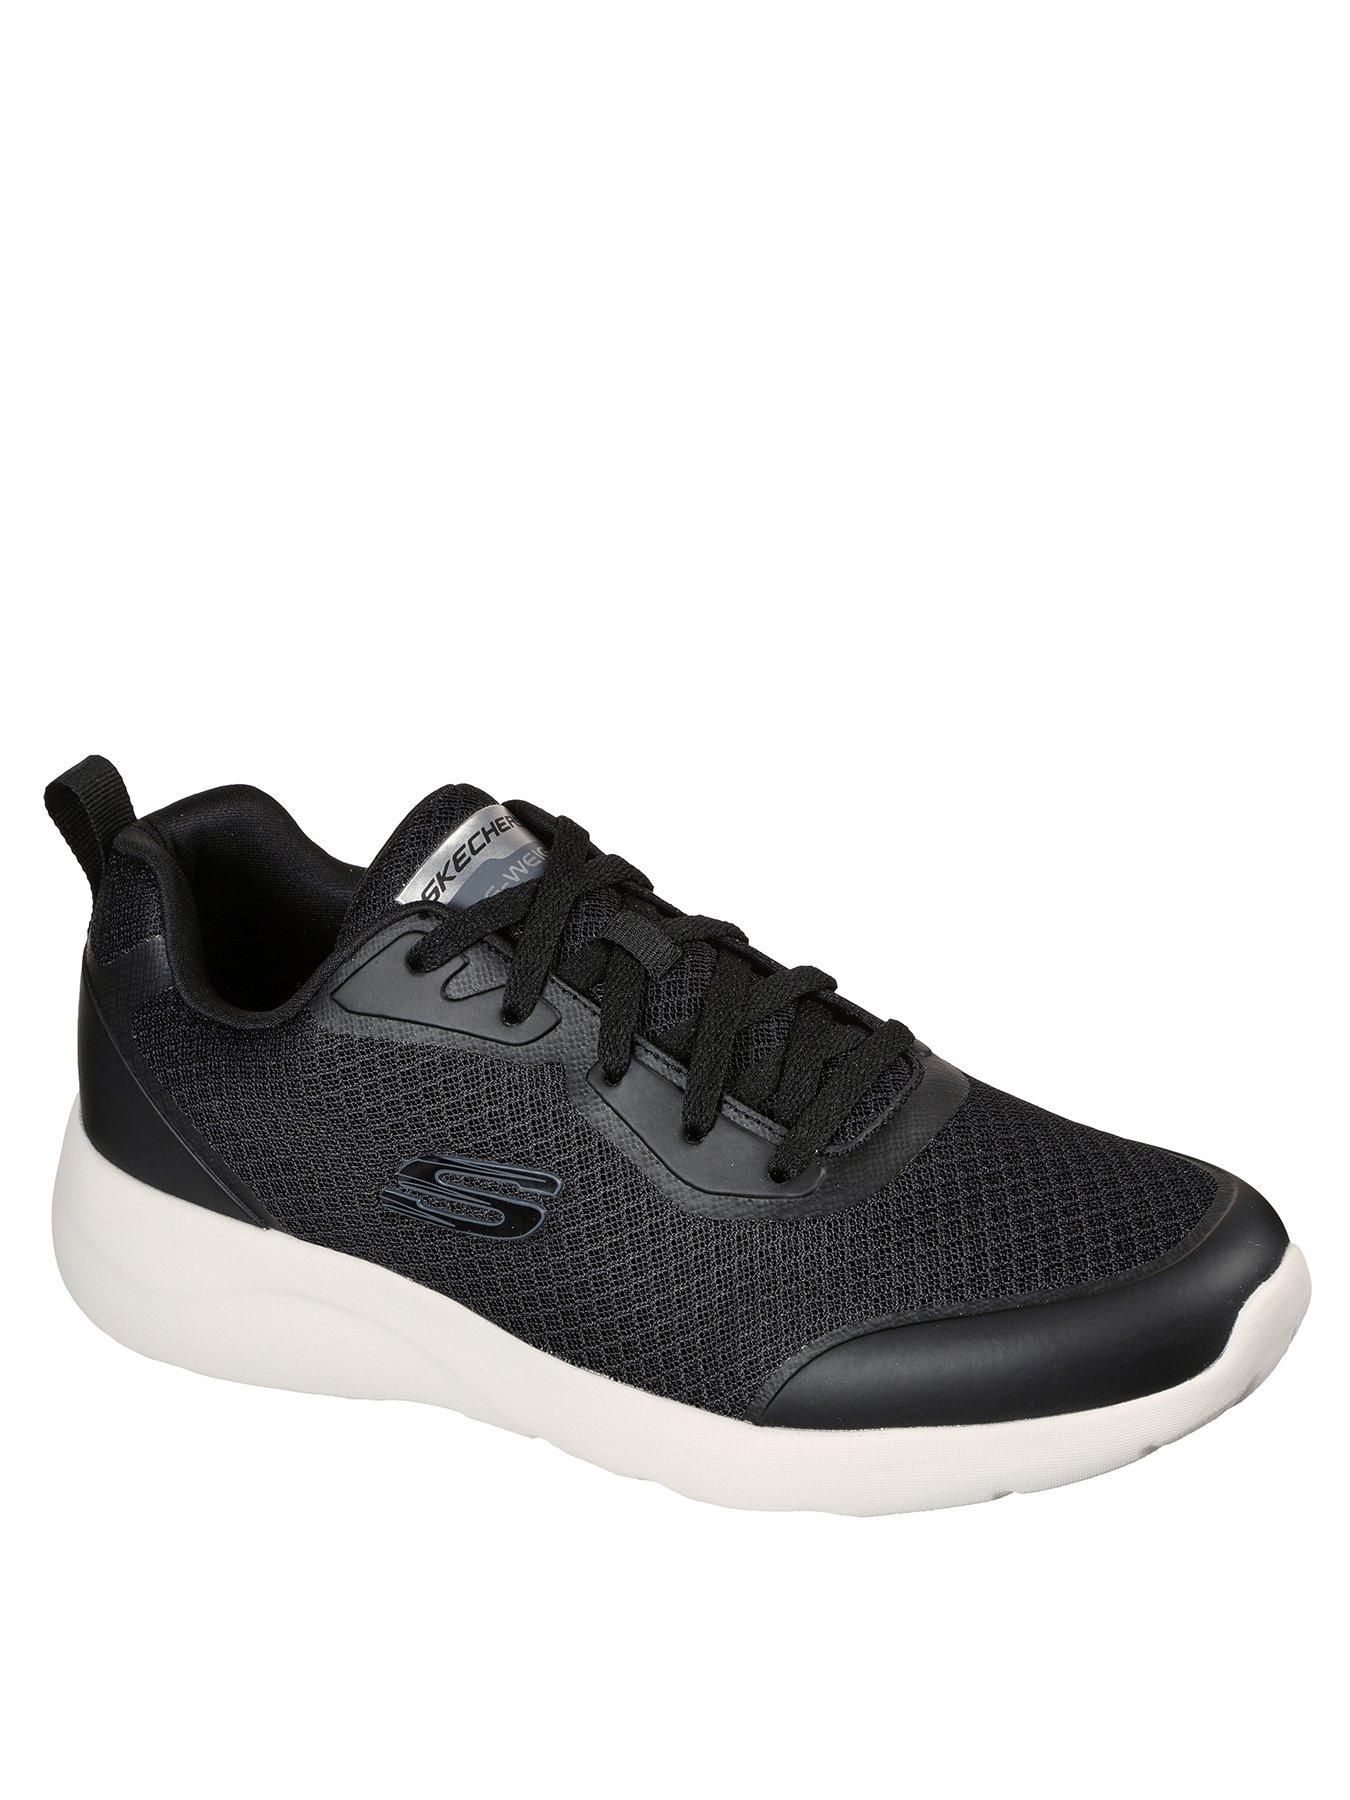 Men Dynamight 2.0 Mesh Memory Foam Lace Up Trainer